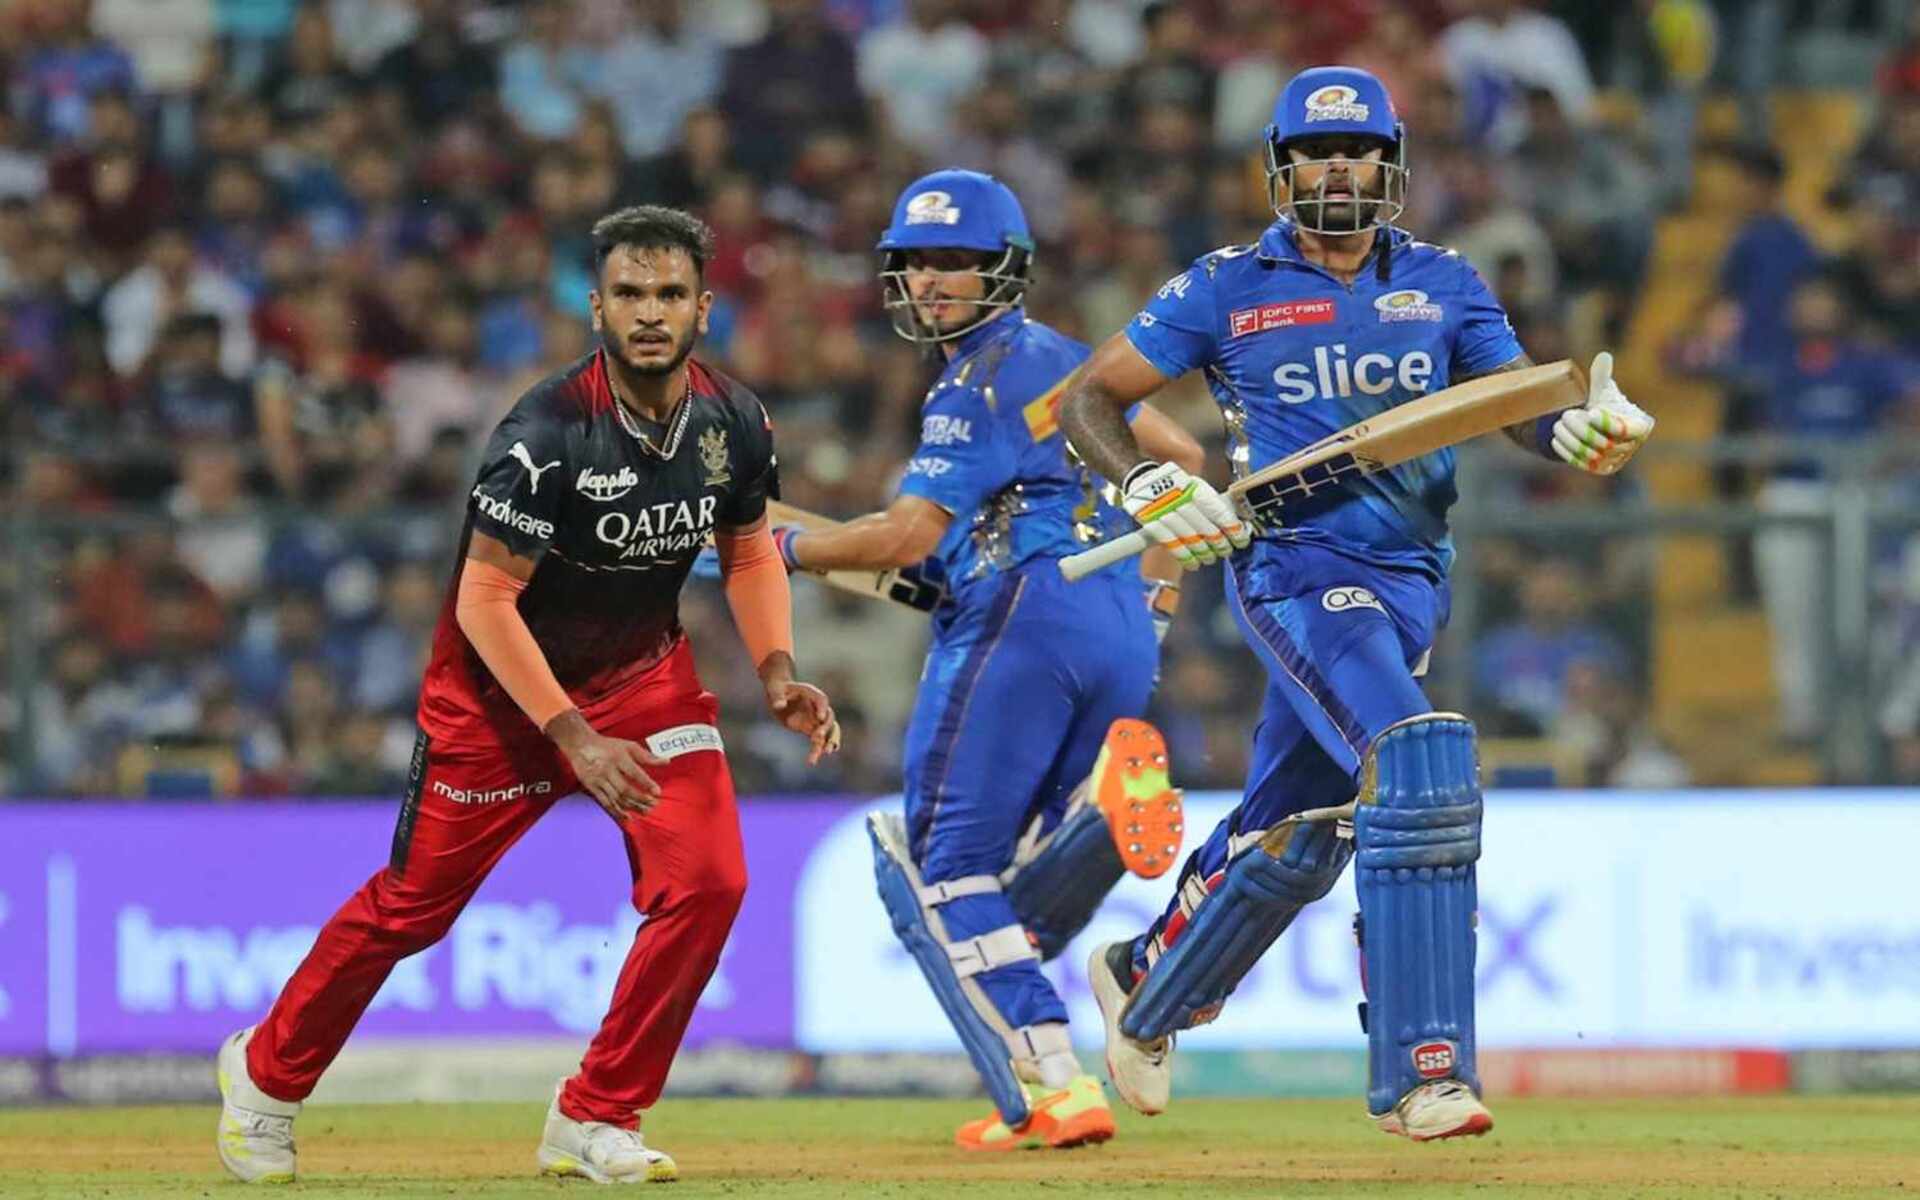 Surya and Nehal starred in MI's win over RCB in Mumbai last year (x.com)